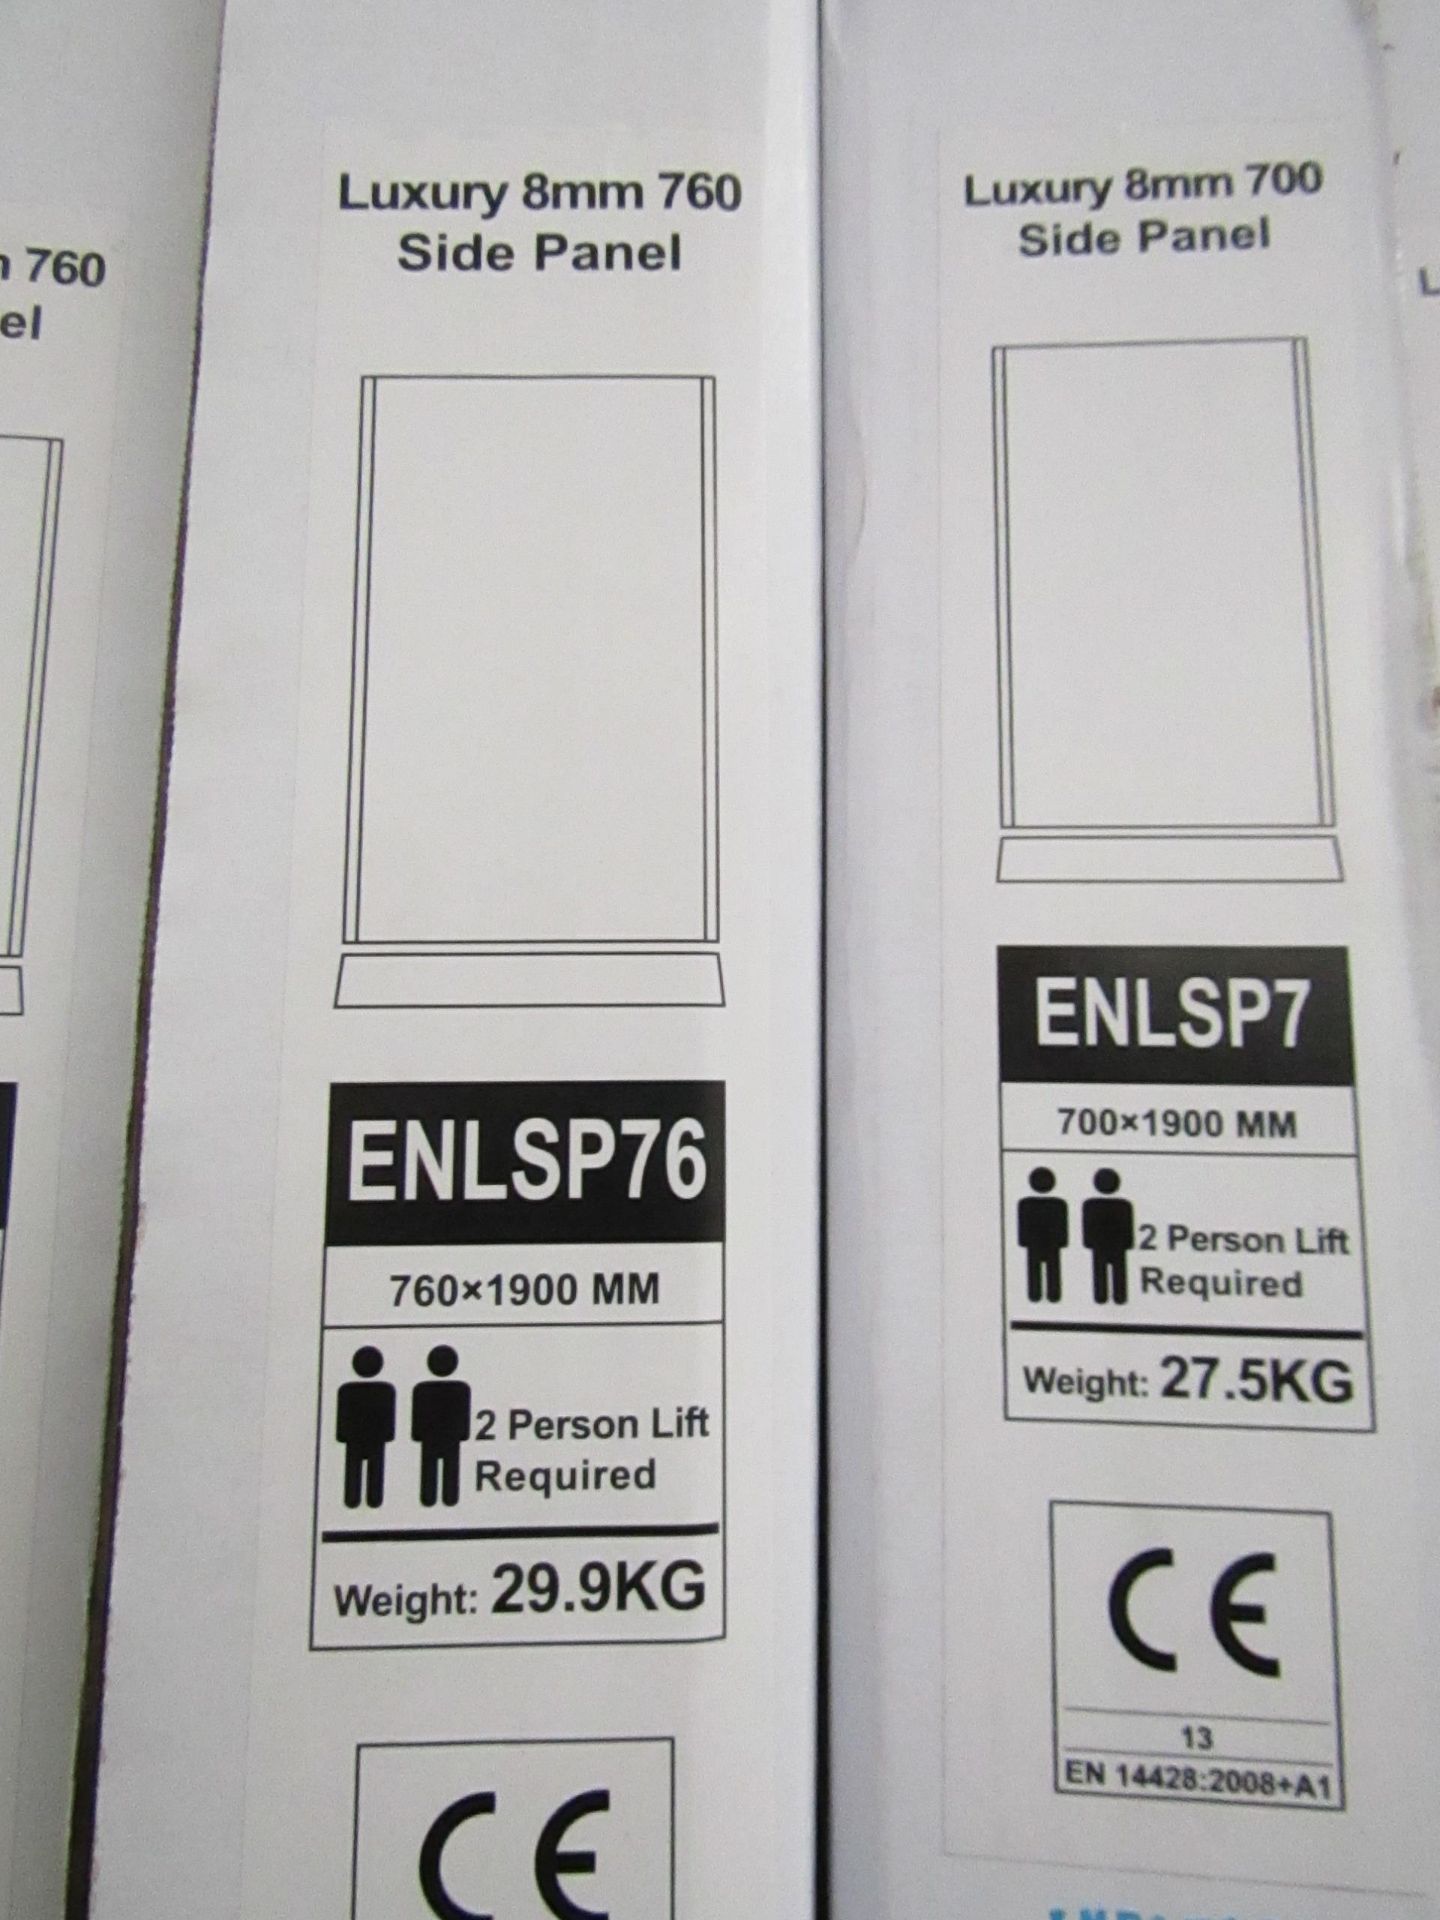 Luxury 8mm 760 side panel ENLSP76, new and boxed. RRP œ143. - Image 2 of 2